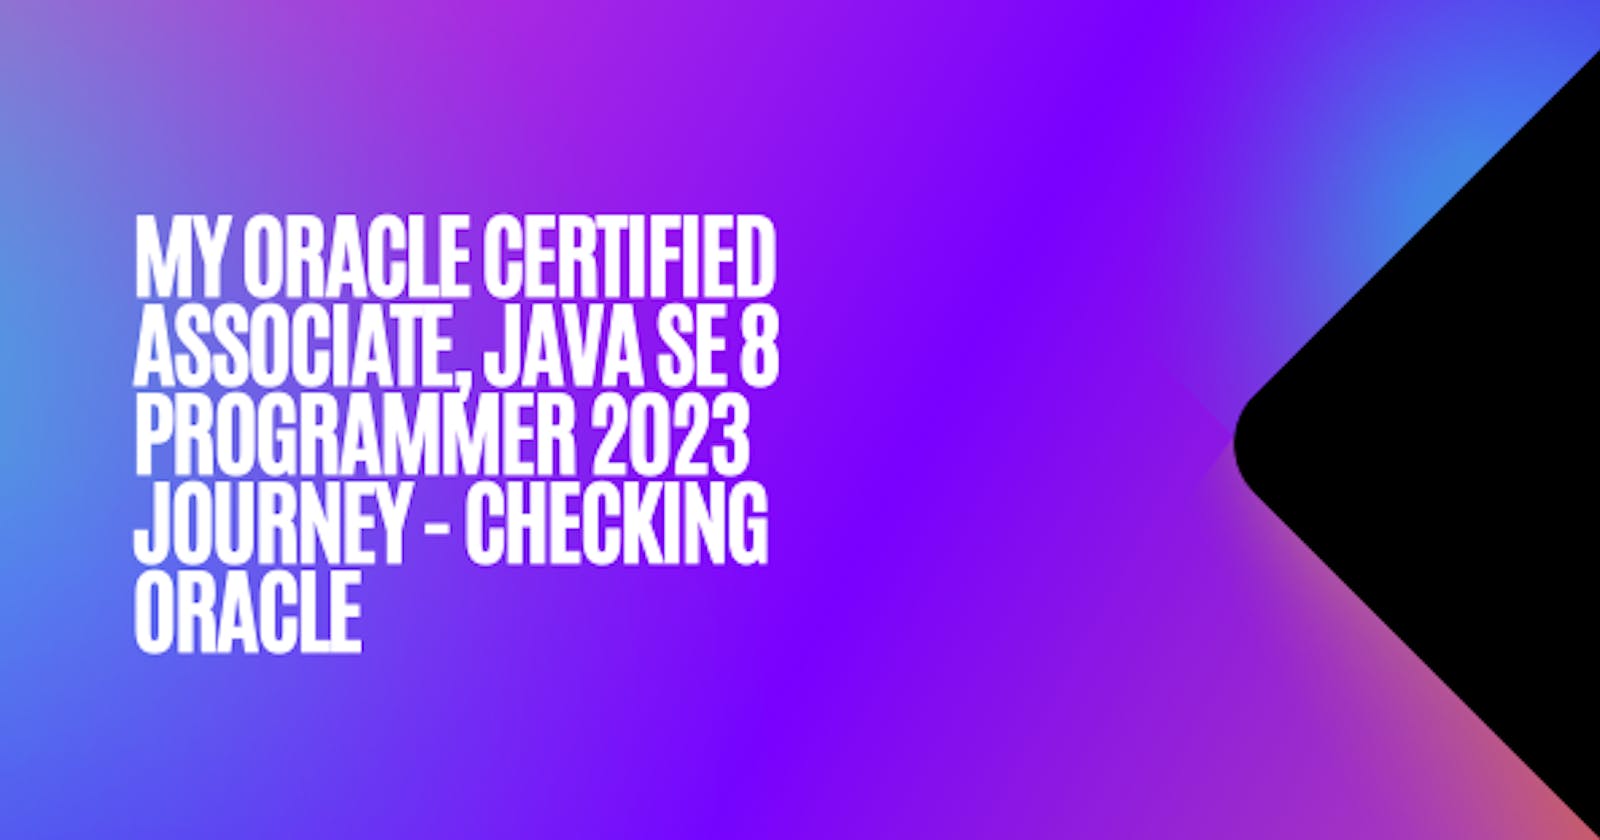 My Oracle Certified Associate, Java SE 8 Programmer 2023 Journey - Checking Oracle